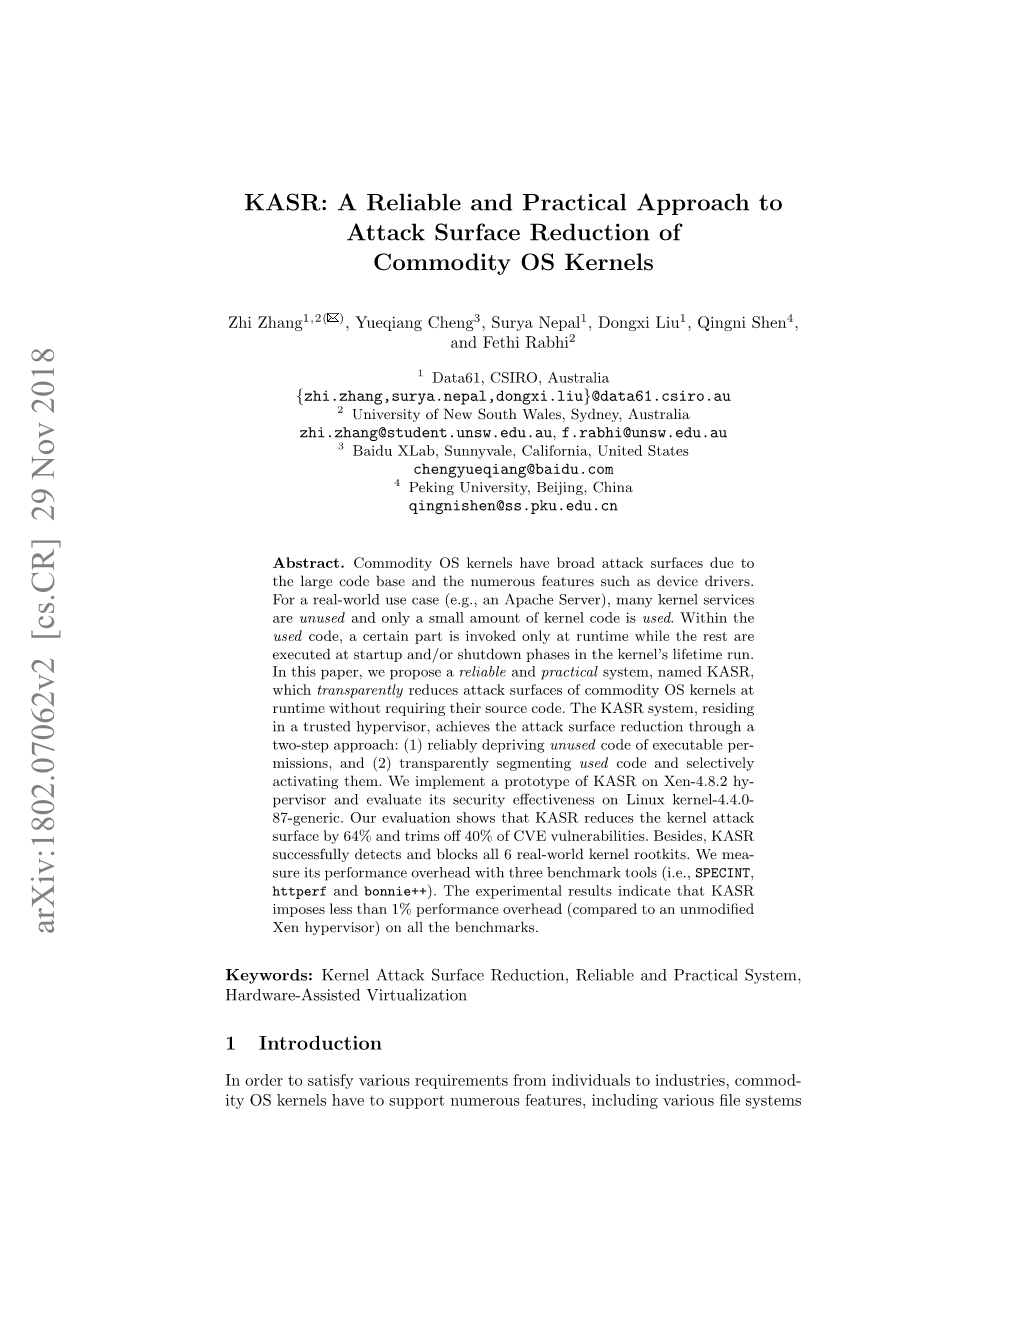 KASR: a Reliable and Practical Approach to Attack Surface Reduction of Commodity OS Kernels